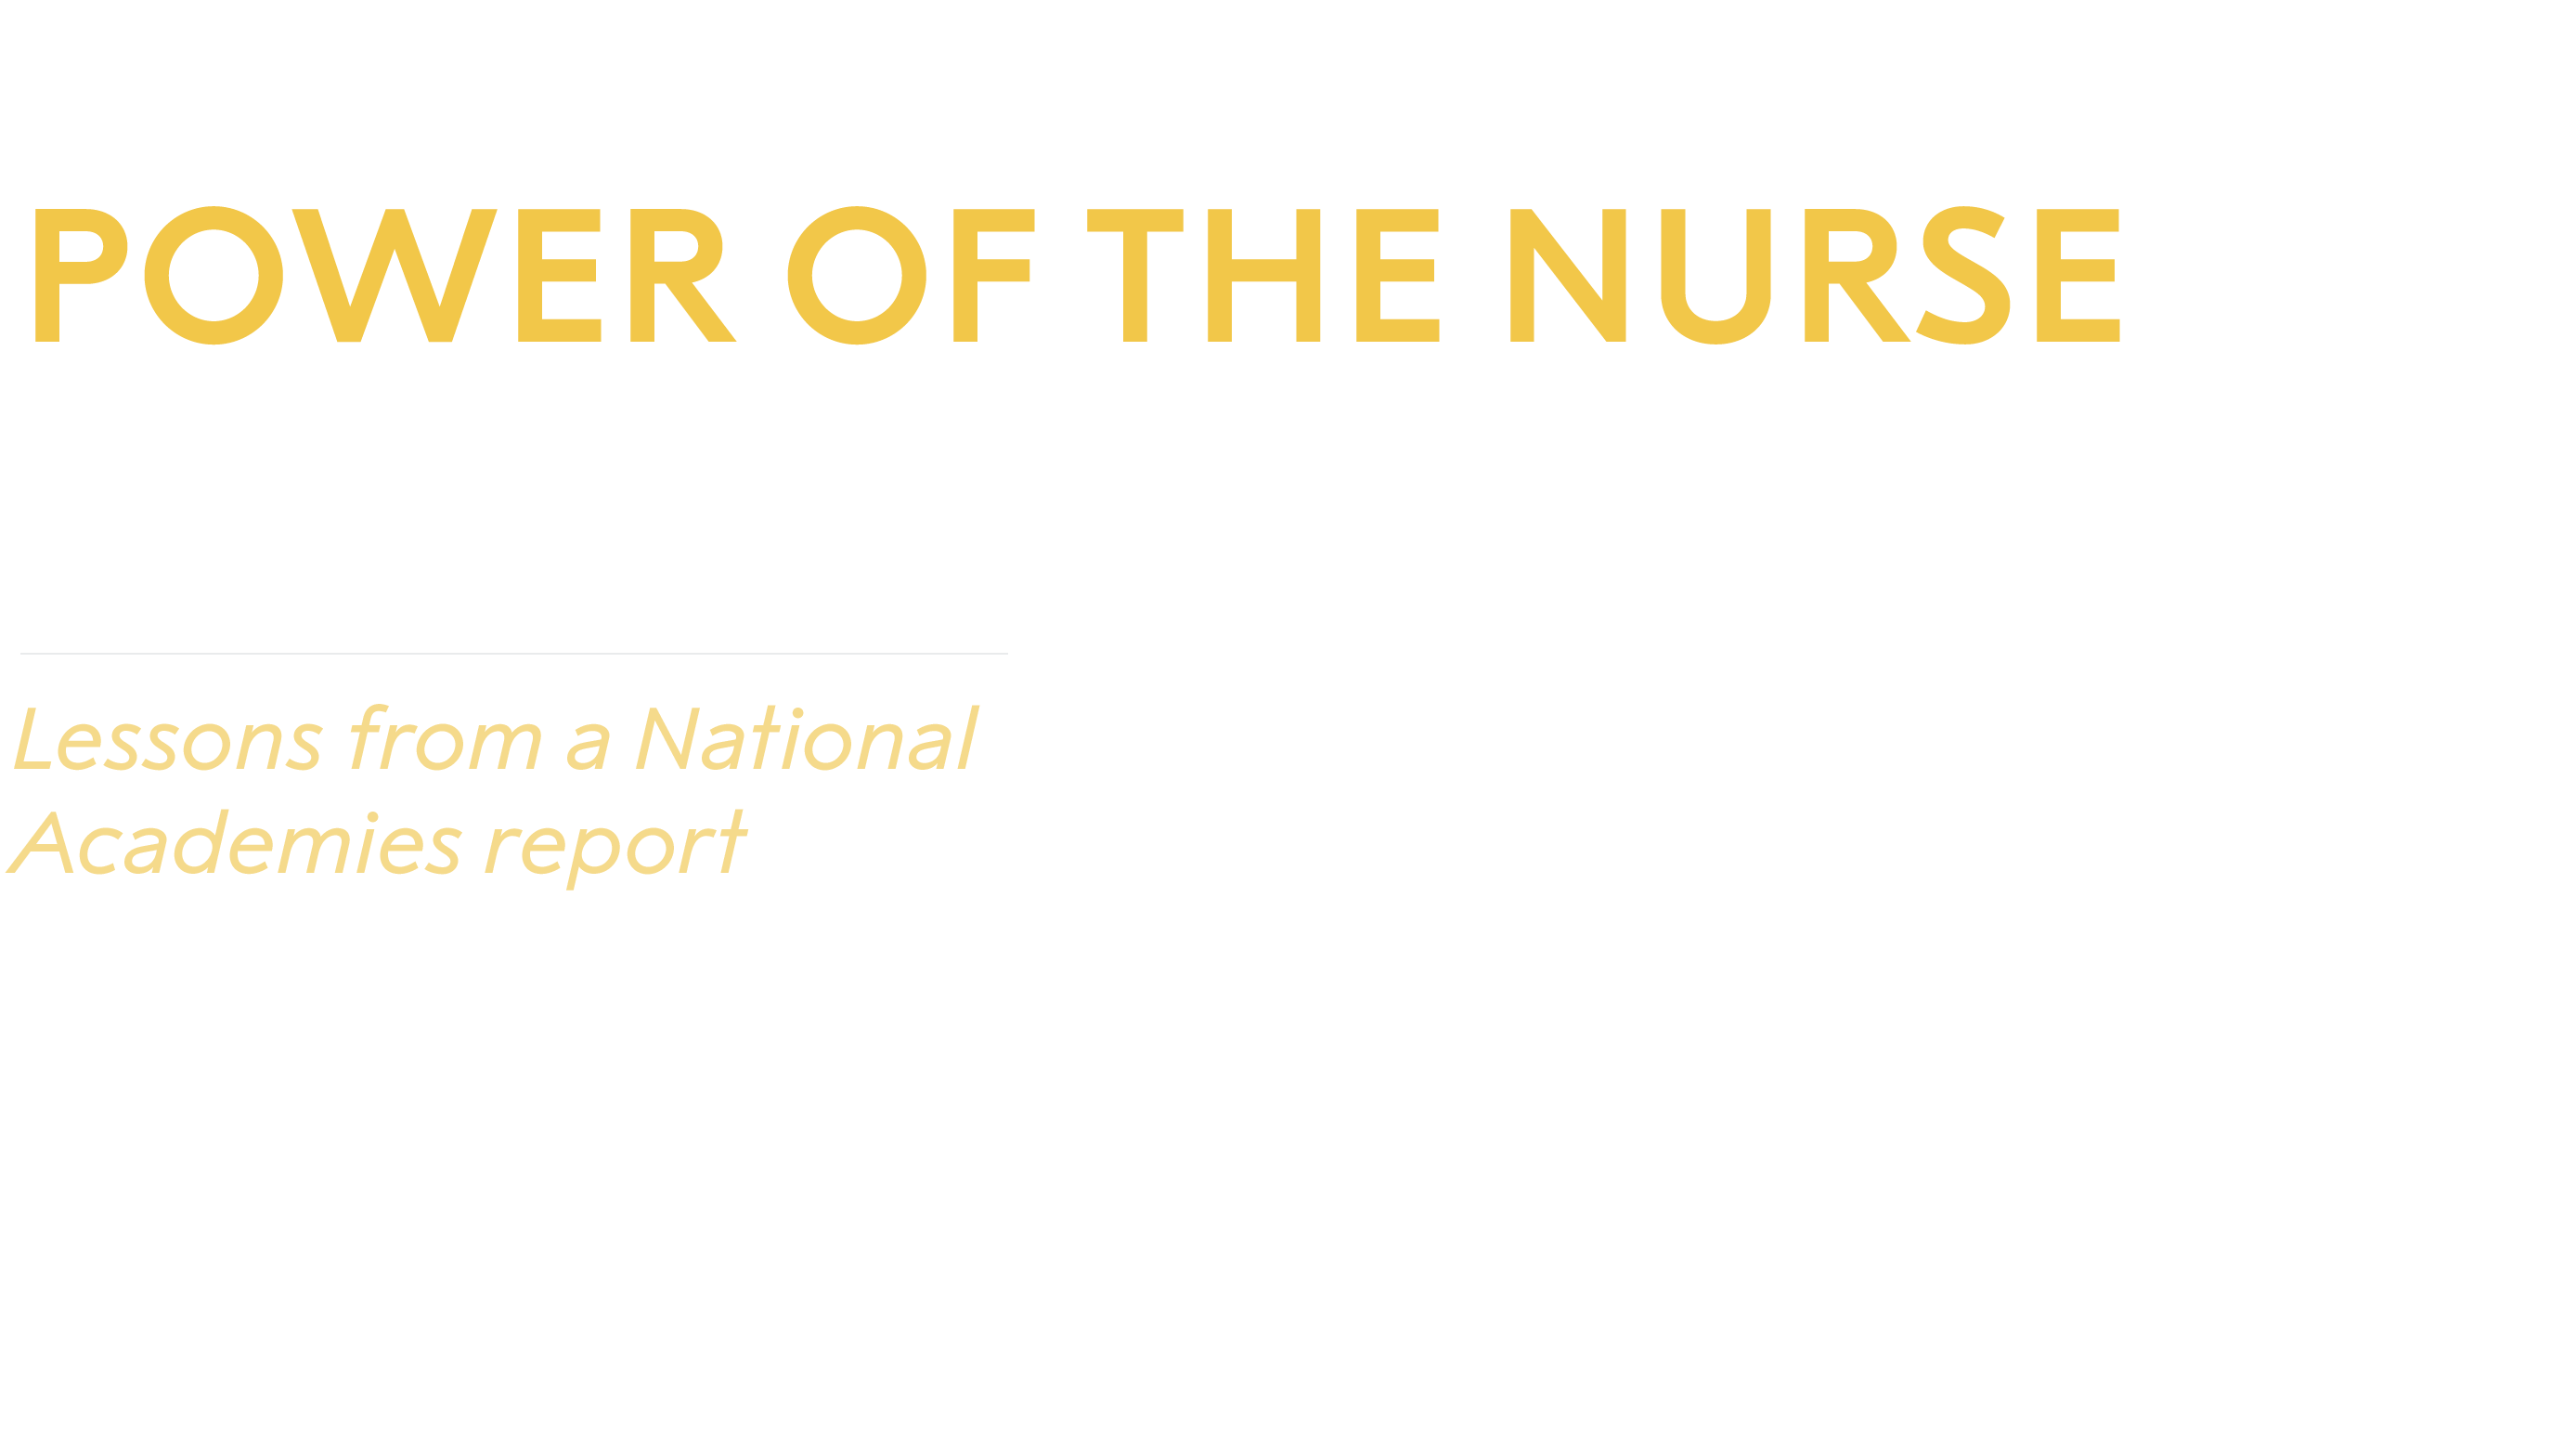 The Future of Nursing 2020-2030
Charting a Path to Achieve Health Equity